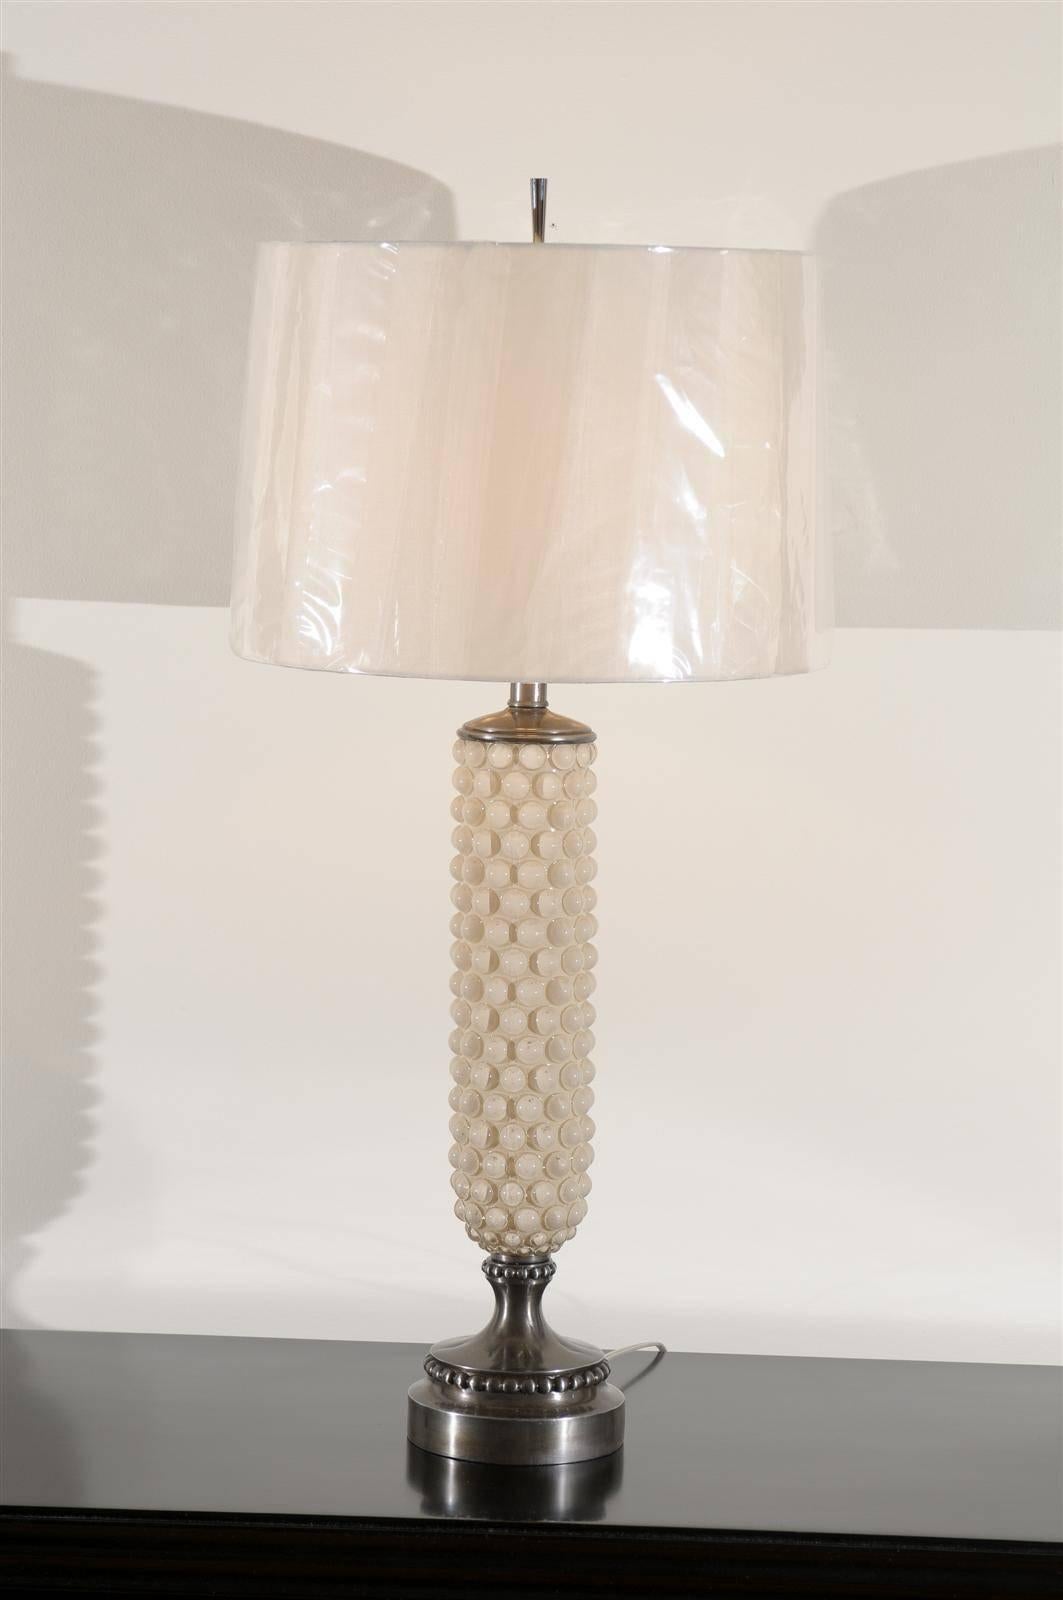 Stellar surviving examples from an unusual lighting line designed by Helena Tynell for the Swedish firm Flygsfors, circa 1960. Thick glass vessels with the iconic bubble pattern, reverse painted in cream. Pedestal base (with bubble detail) and